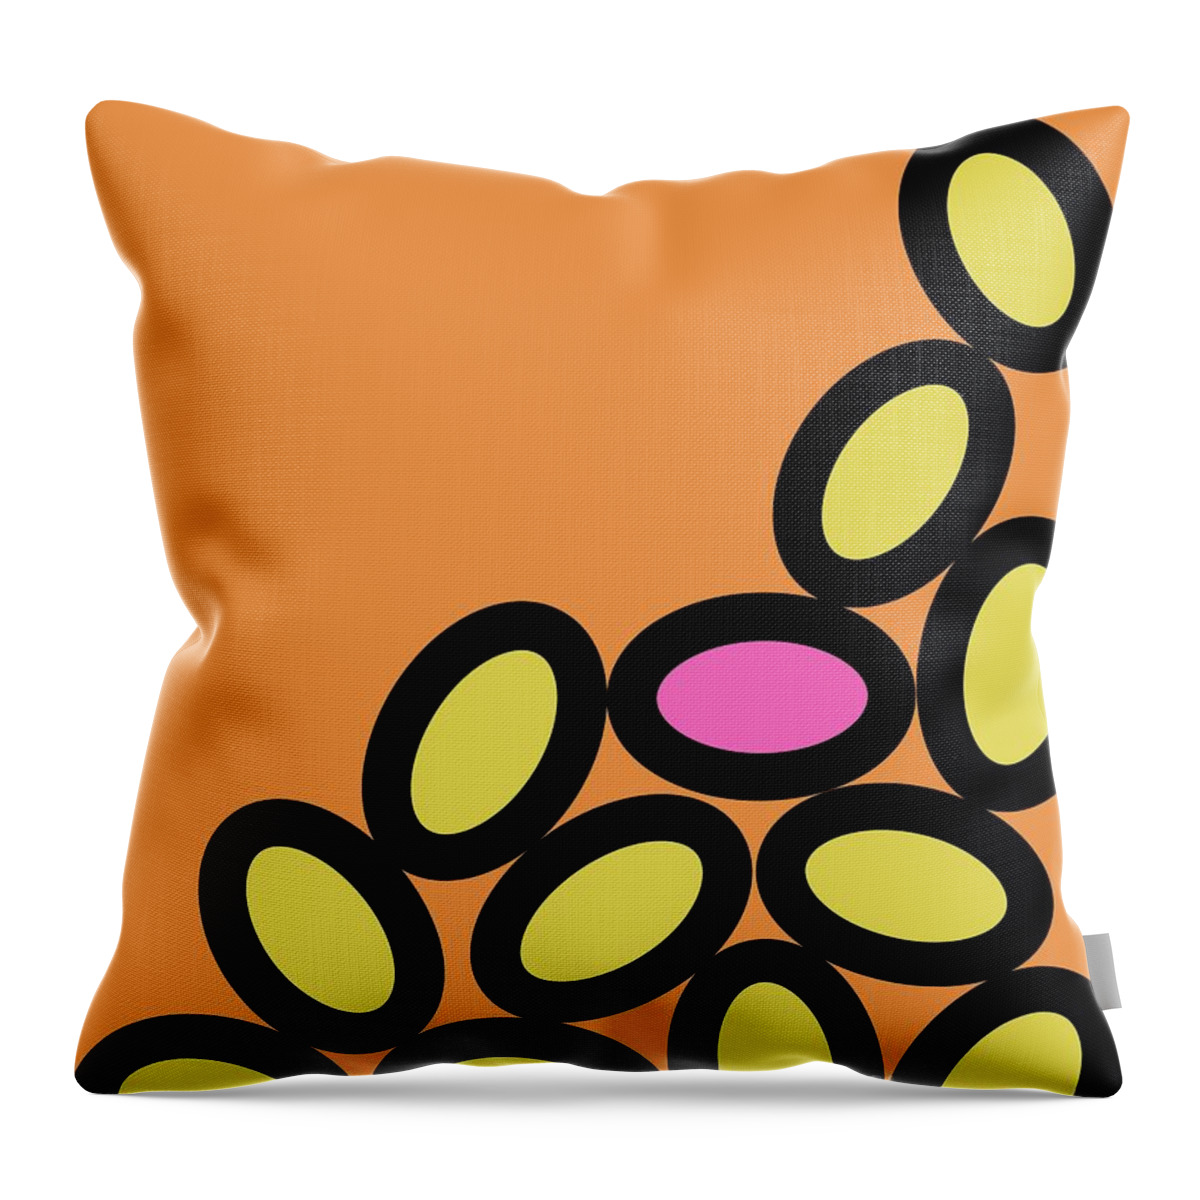 Abstract Throw Pillow featuring the digital art Abstract Ovals on Orange by Donna Mibus